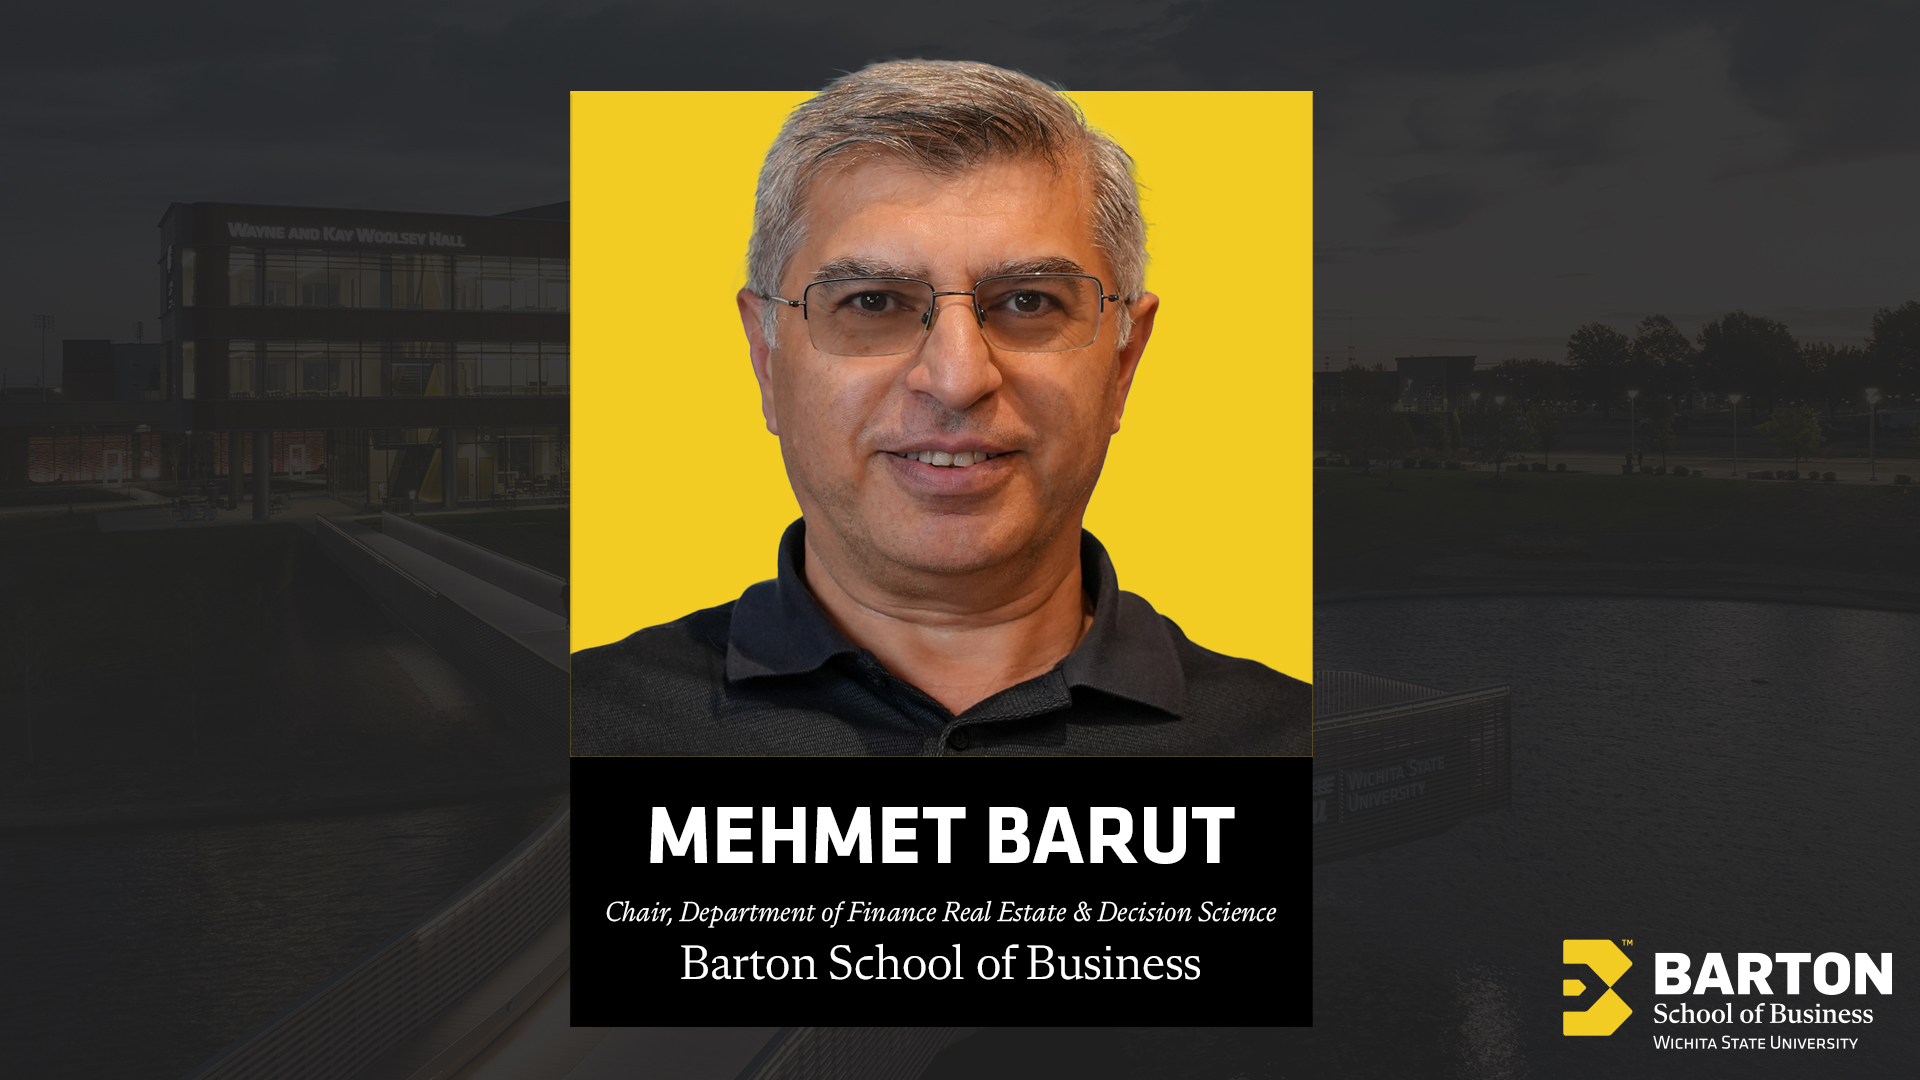 Dr. Mehmet Barut, the new department chair of the Department of Finance, Real Estate and Decision Sciences (FREDS) at Wichita State University.